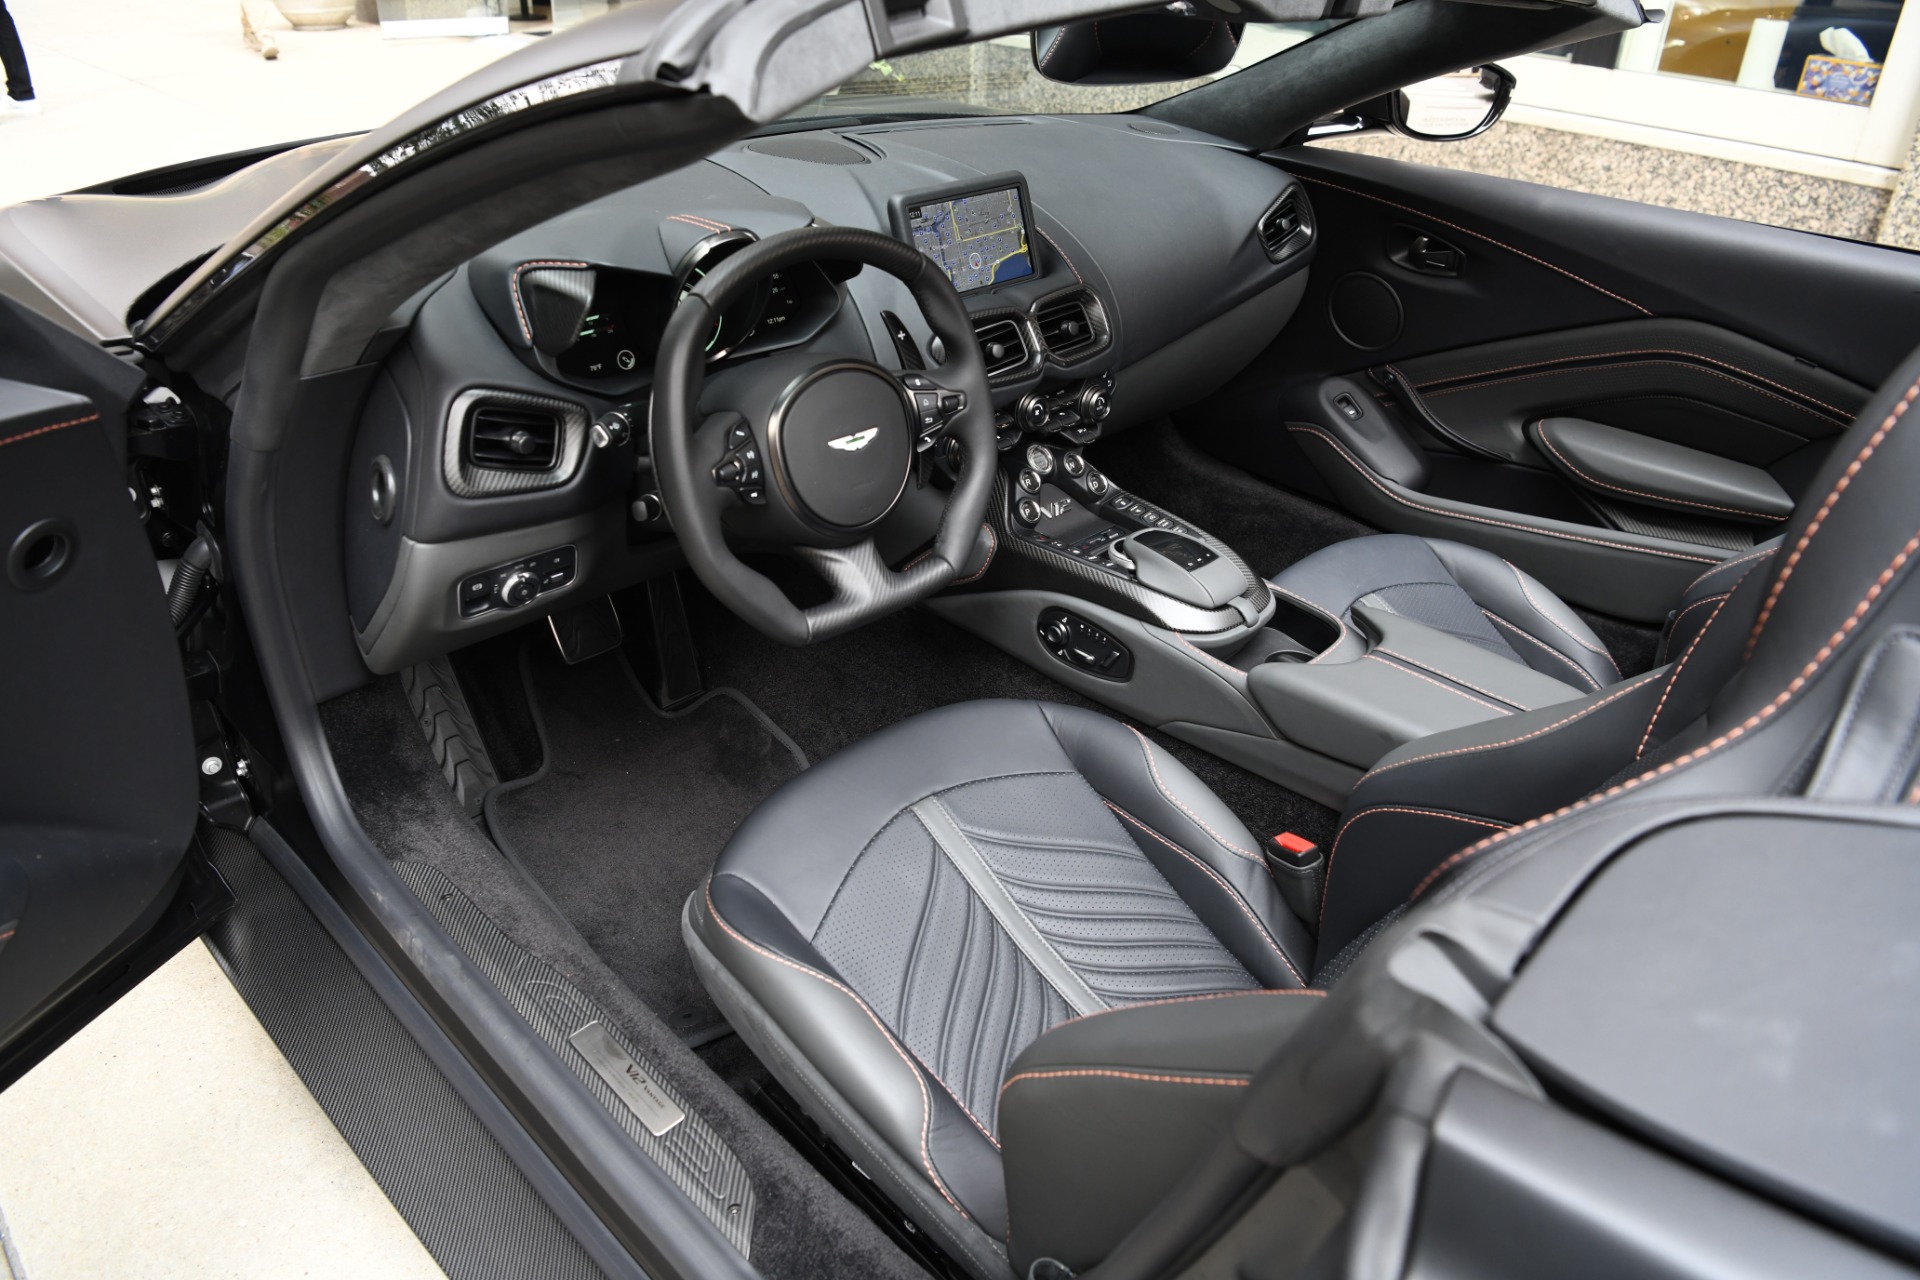 The 2023 Aston Martin Vantage 5.21 V21 Convertible: Know This!